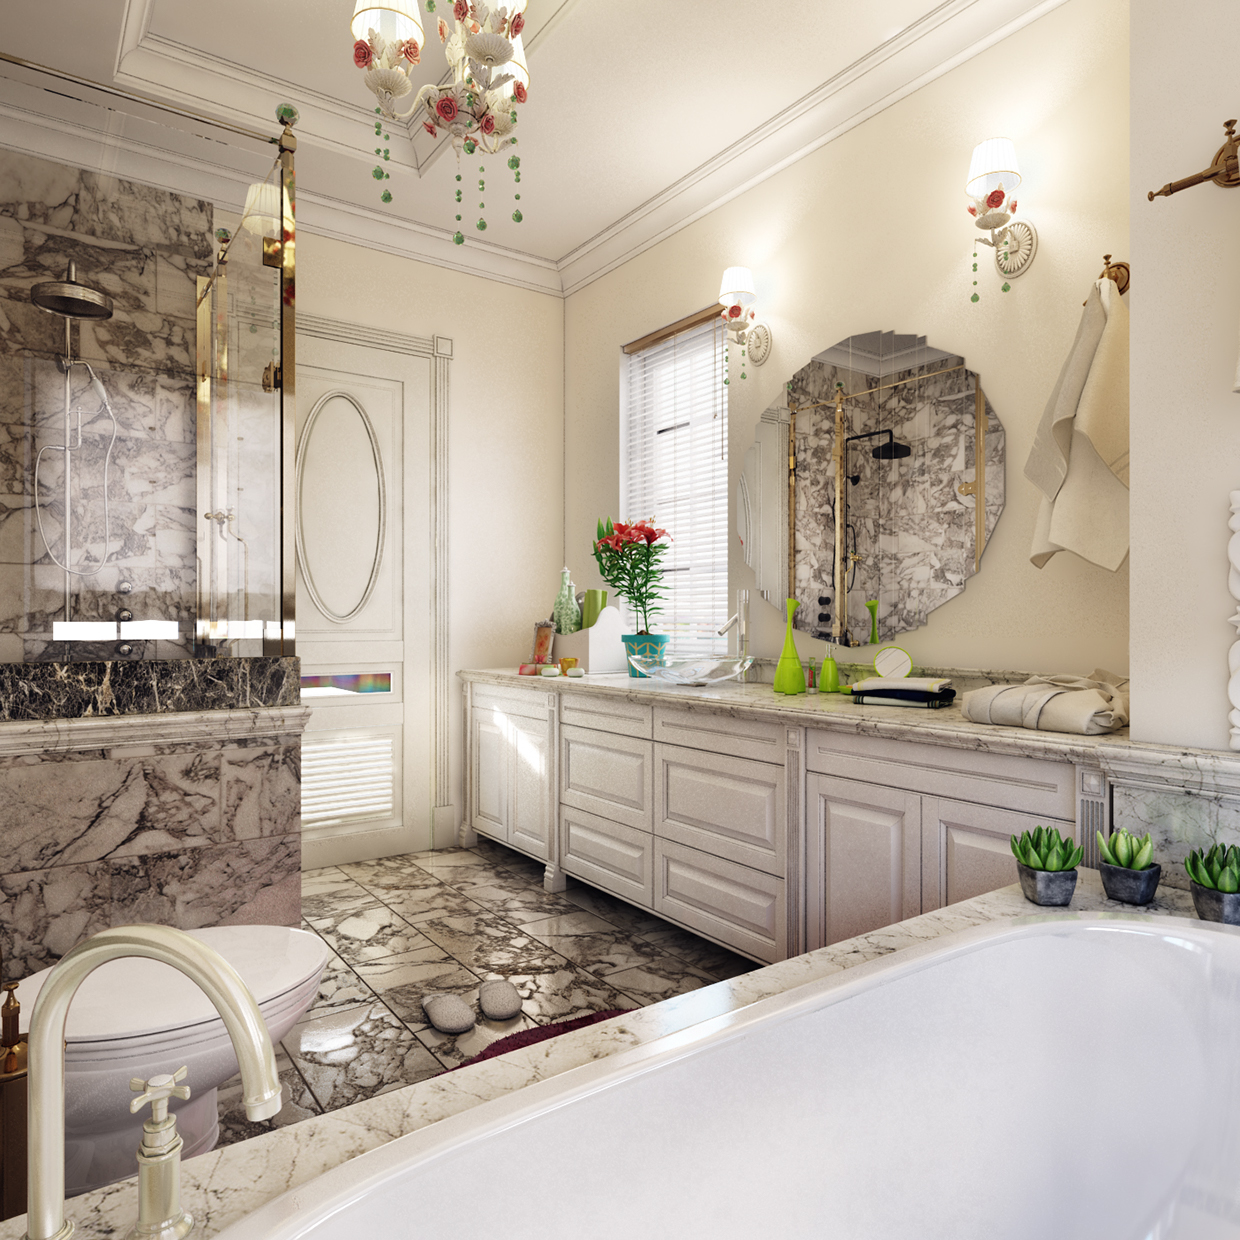 Decorating a small bathroom luxuriously "width =" 1240 "height =" 1240 "srcset =" https://mileray.com/wp-content/uploads/2020/05/1588514966_601_Decorating-Small-Bathroom-Designs-With-Colorful-Paint-Wall-Making-It.jpg 1240w, https: // mileray.com/wp-content/uploads/2016/08/Koj-Design7-1-150x150.jpg 150w, https://mileray.com/wp-content/uploads/2016/08/Koj-Design7-1-300x300 .jpg 300w, https://mileray.com/wp-content/uploads/2016/08/Koj-Design7-1-768x768.jpg 768w, https://mileray.com/wp-content/uploads/2016/08 /Koj-Design7-1-1024x1024.jpg 1024w, https://mileray.com/wp-content/uploads/2016/08/Koj-Design7-1-696x696.jpg 696w, https://mileray.com/wp -content / uploads / 2016/08 / Koj-Design7-1-1068x1068.jpg 1068w, https://mileray.com/wp-content/uploads/2016/08/Koj-Design7-1-420x420.jpg 420w "sizes = "(maximum width: 1240px) 100vw, 1240px